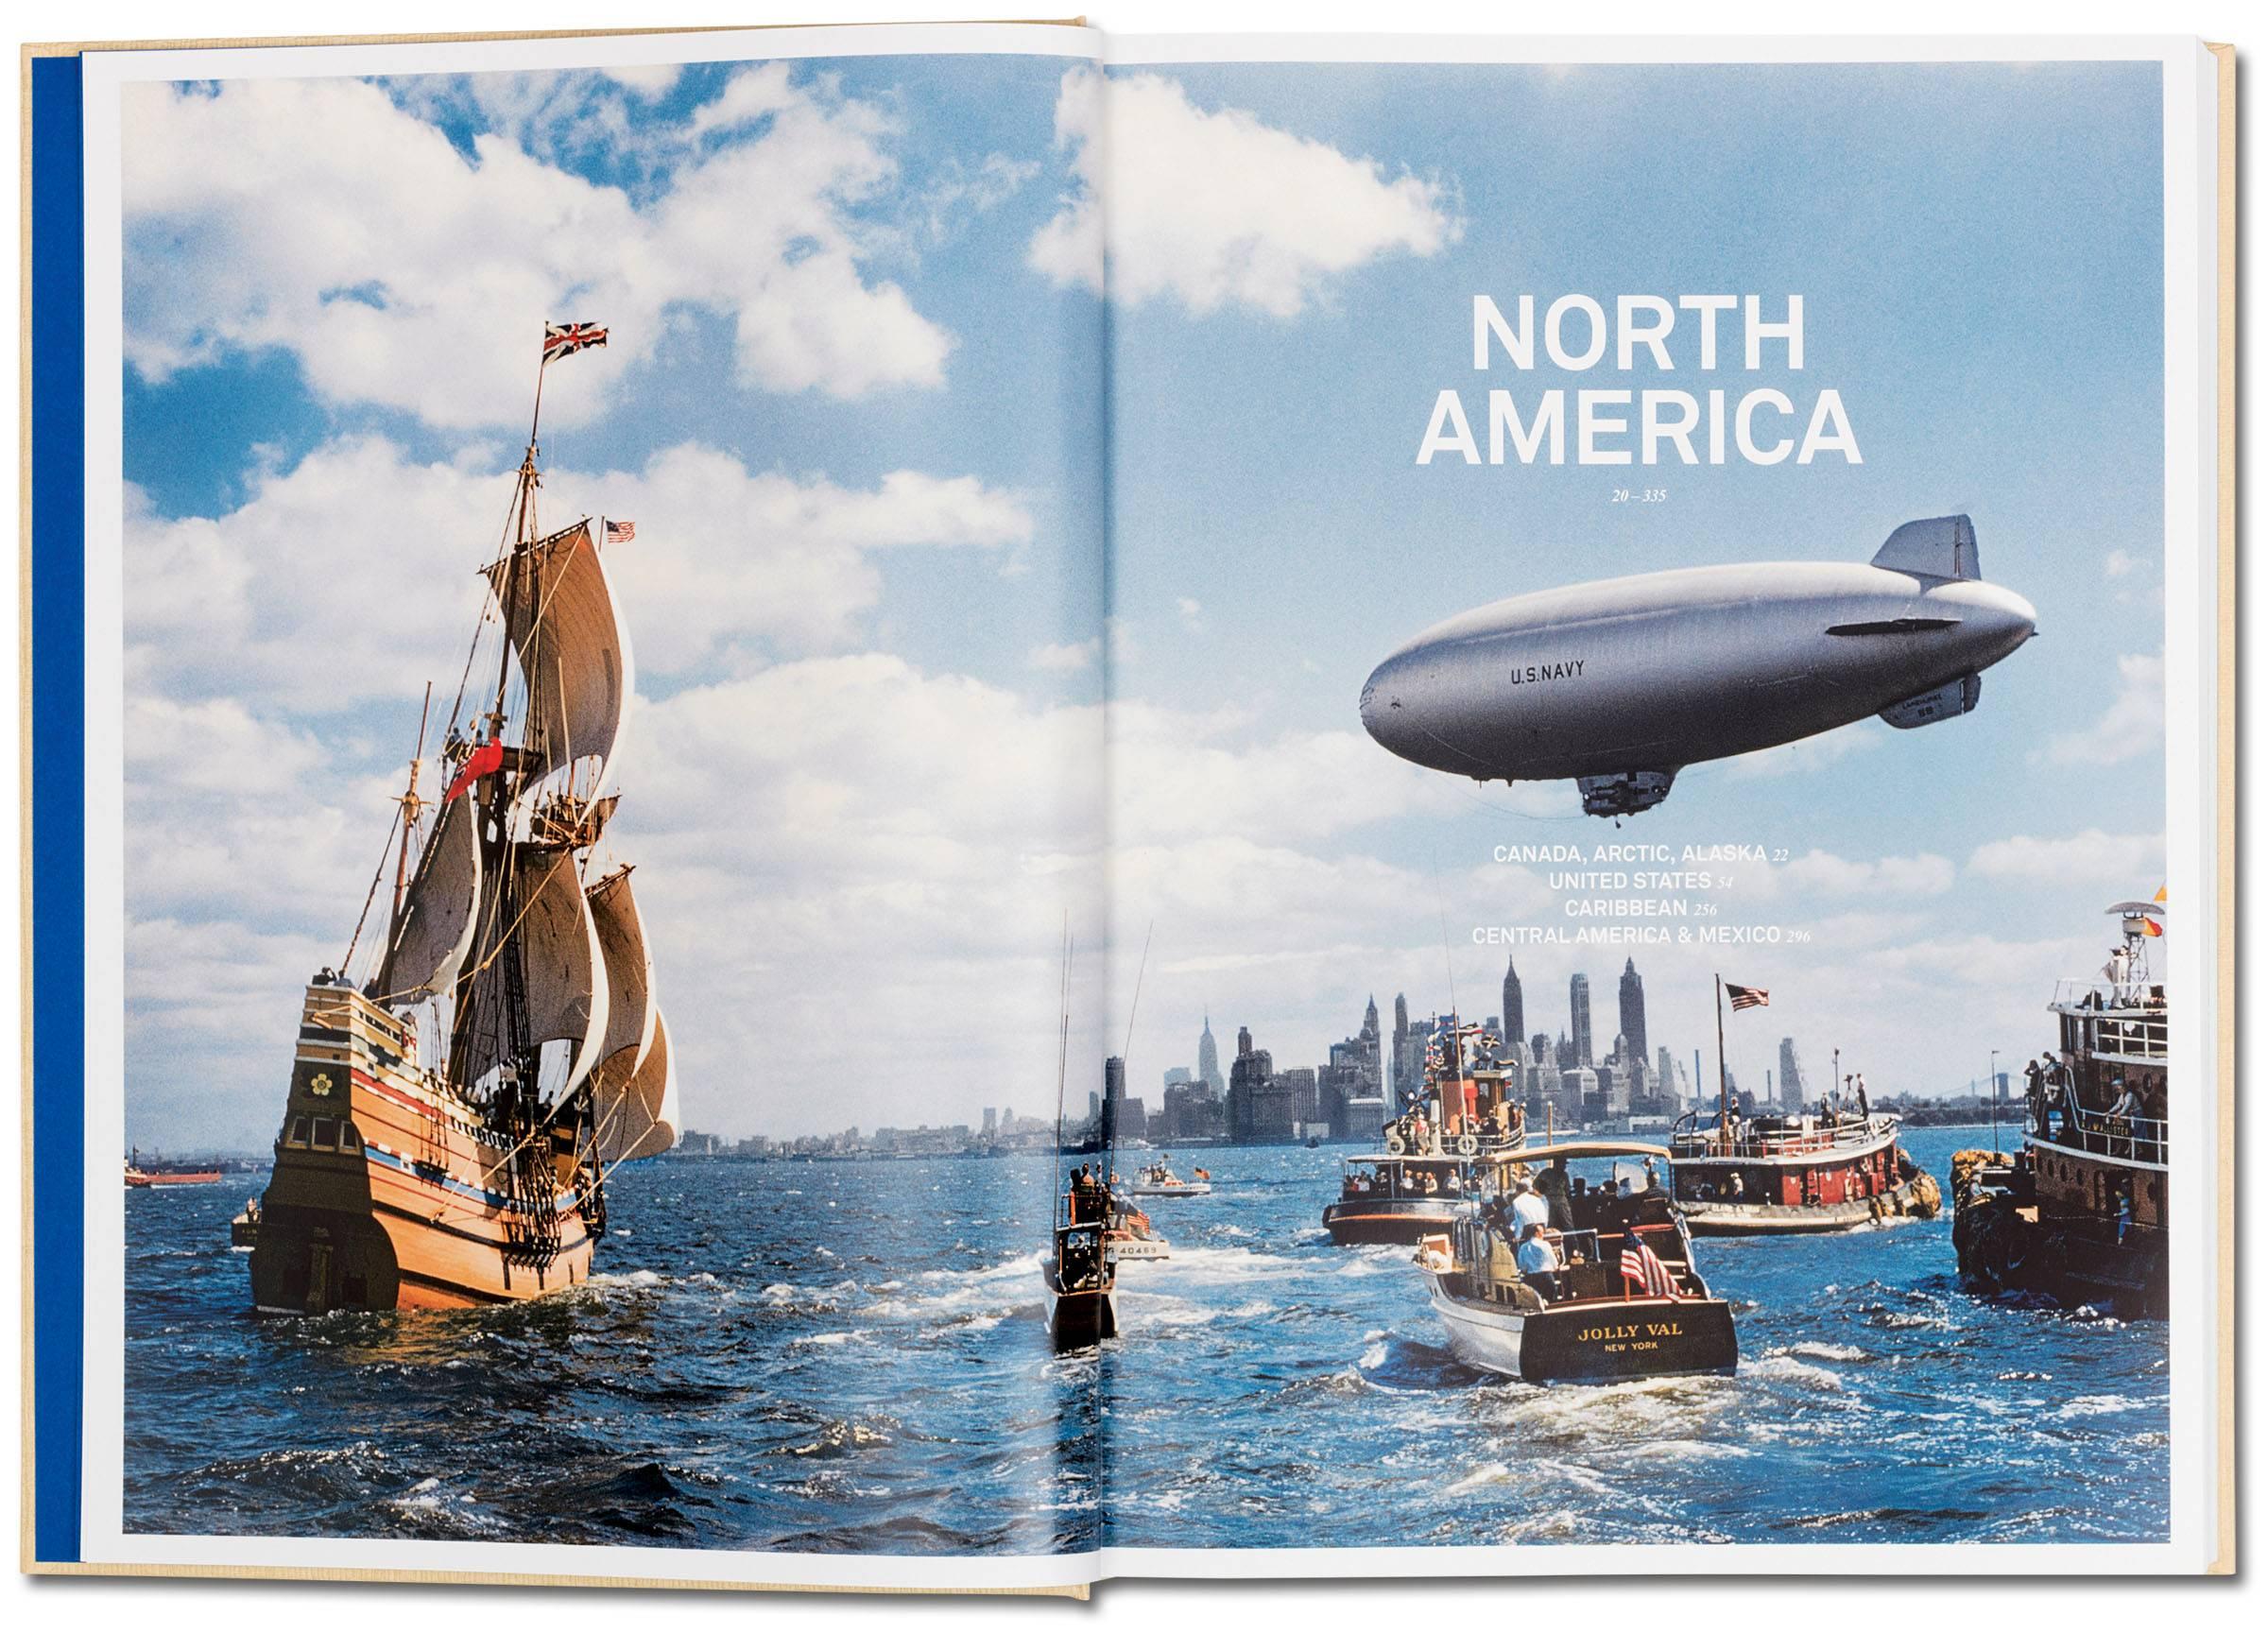 Contemporary National Geographic. Around the World in 125 Years